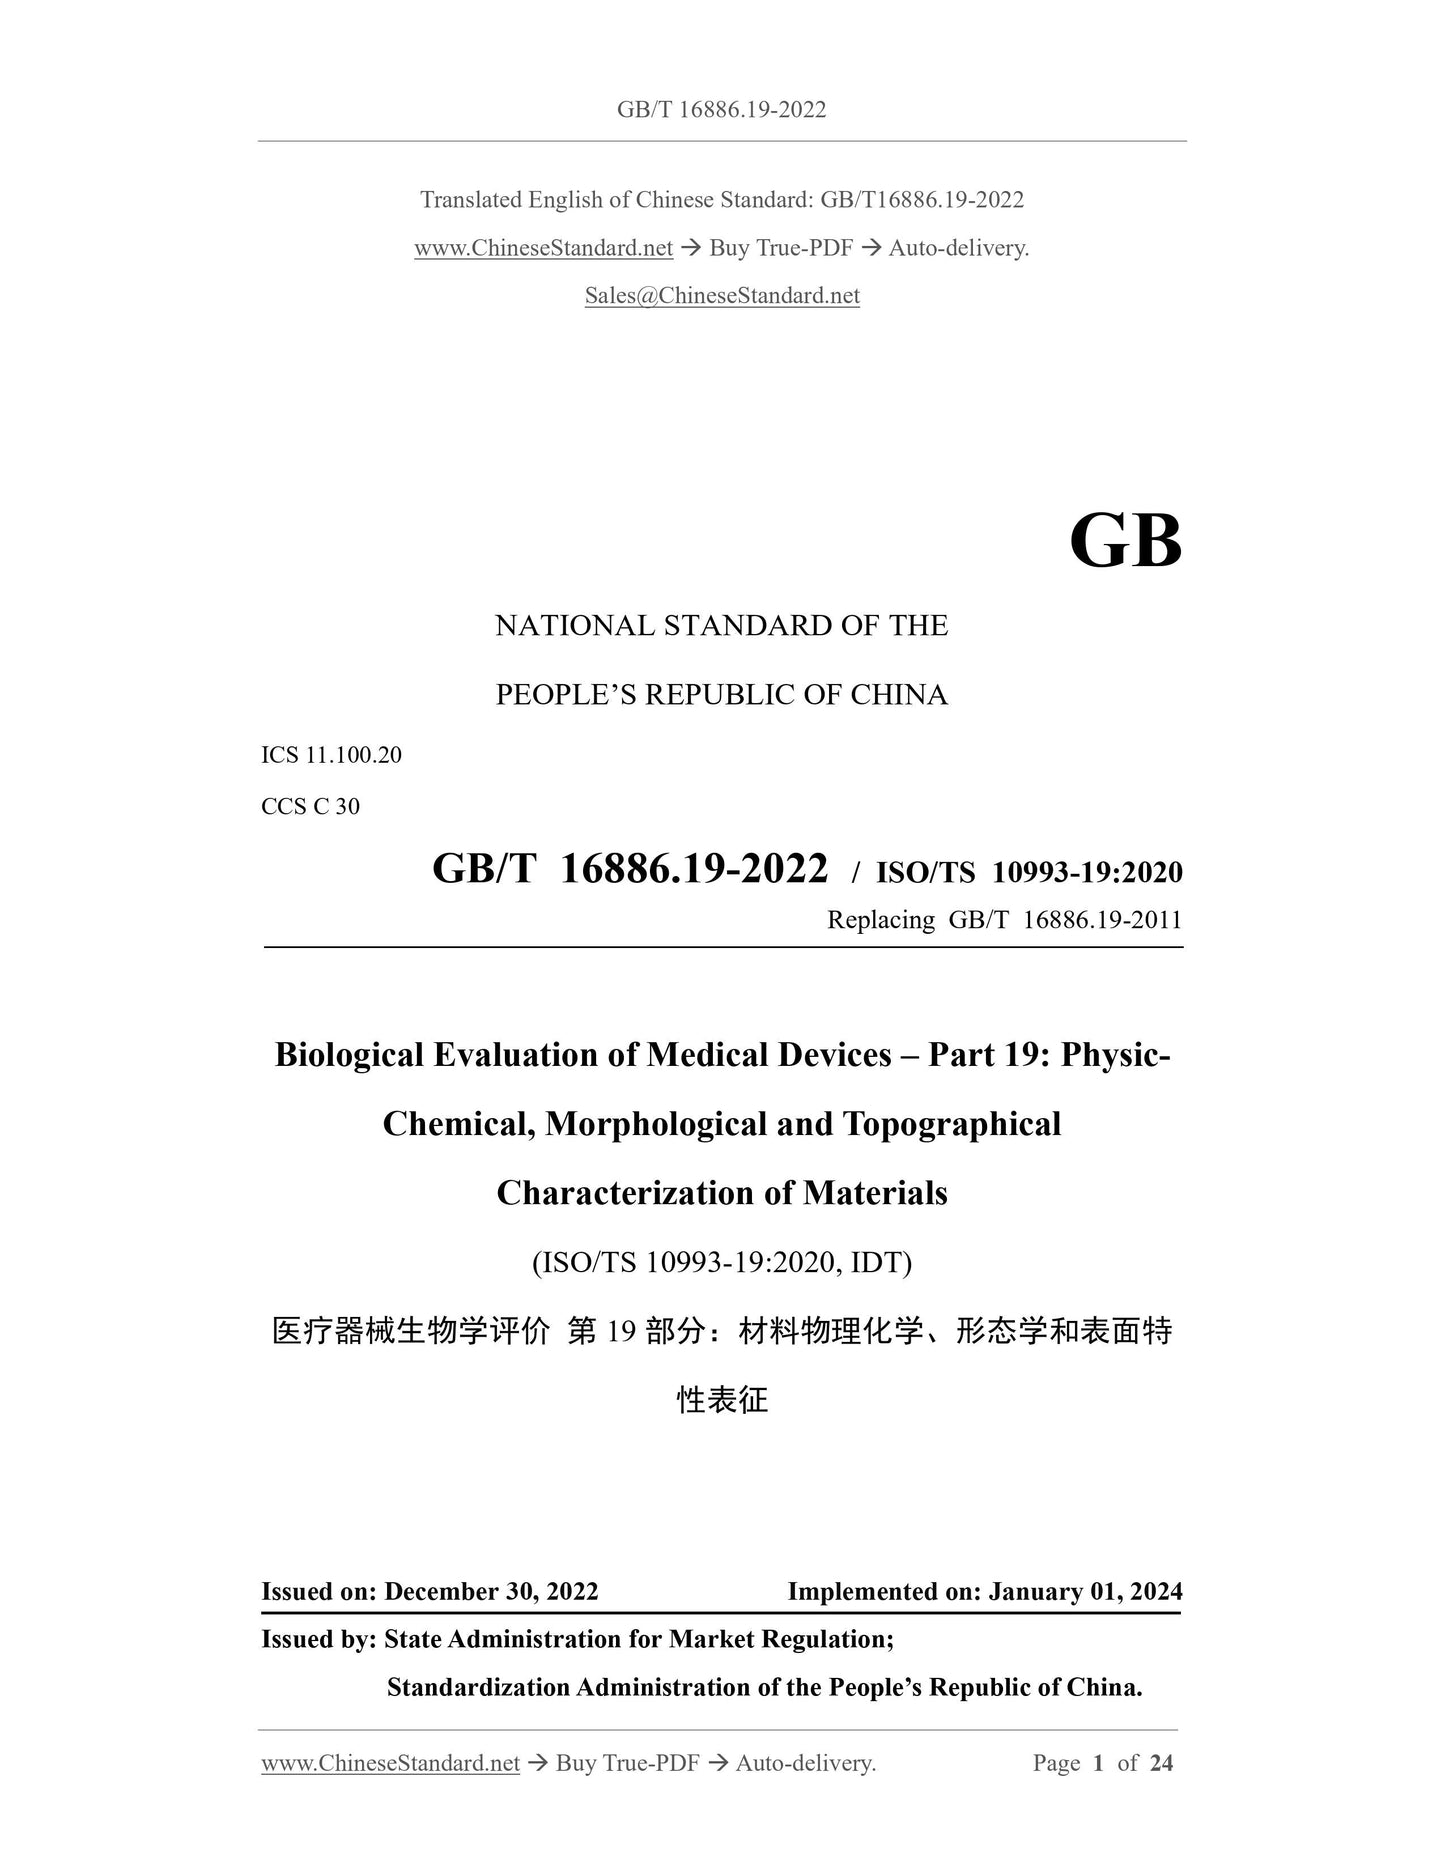 GB/T 16886.19-2022 Page 1